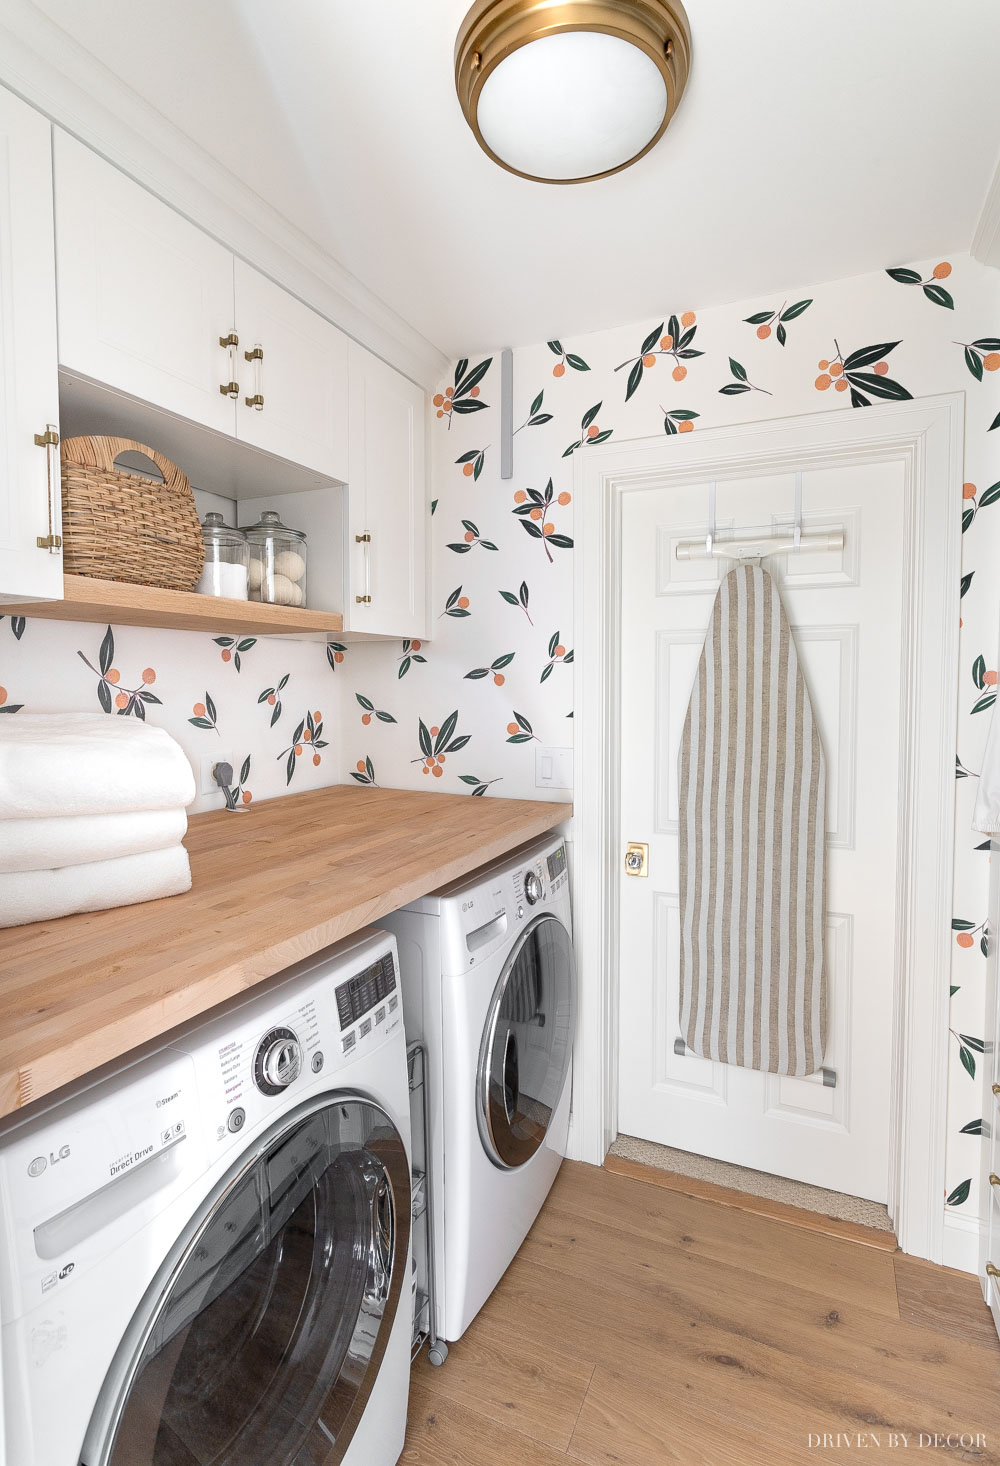 5 must haves for your laundry room